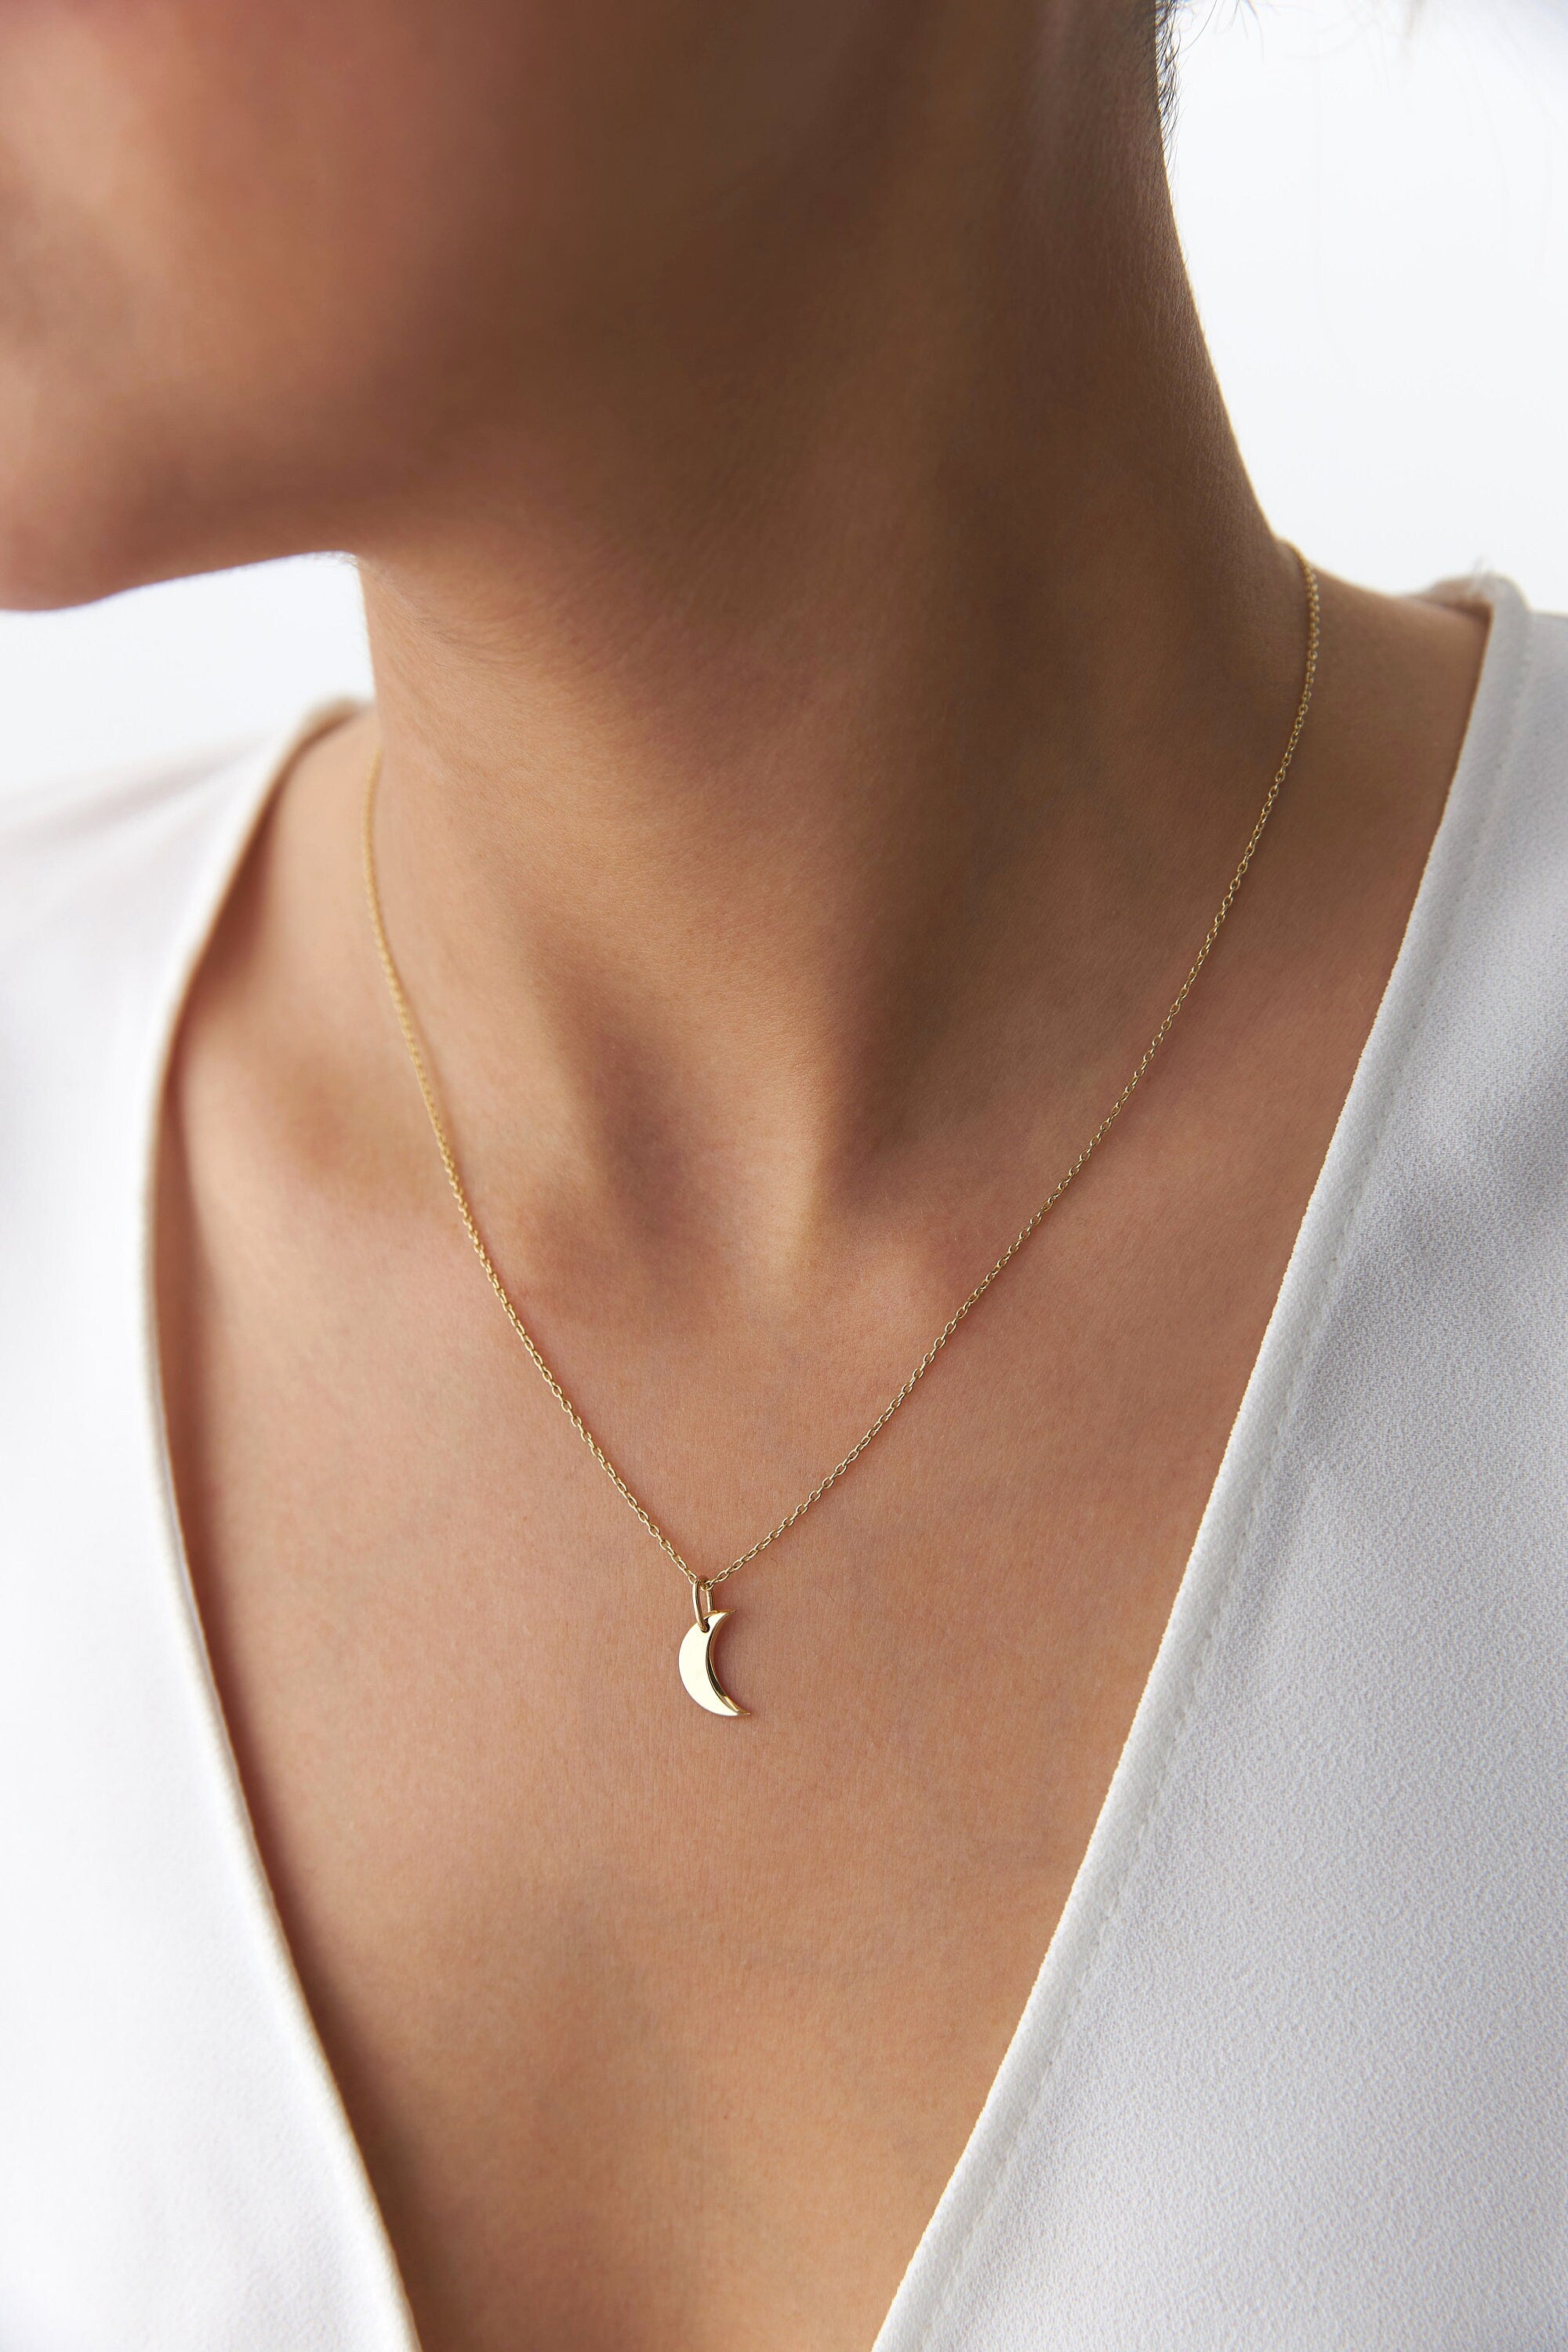 Crescent Moon Pendant Necklace Available in 14K and 18K Gold